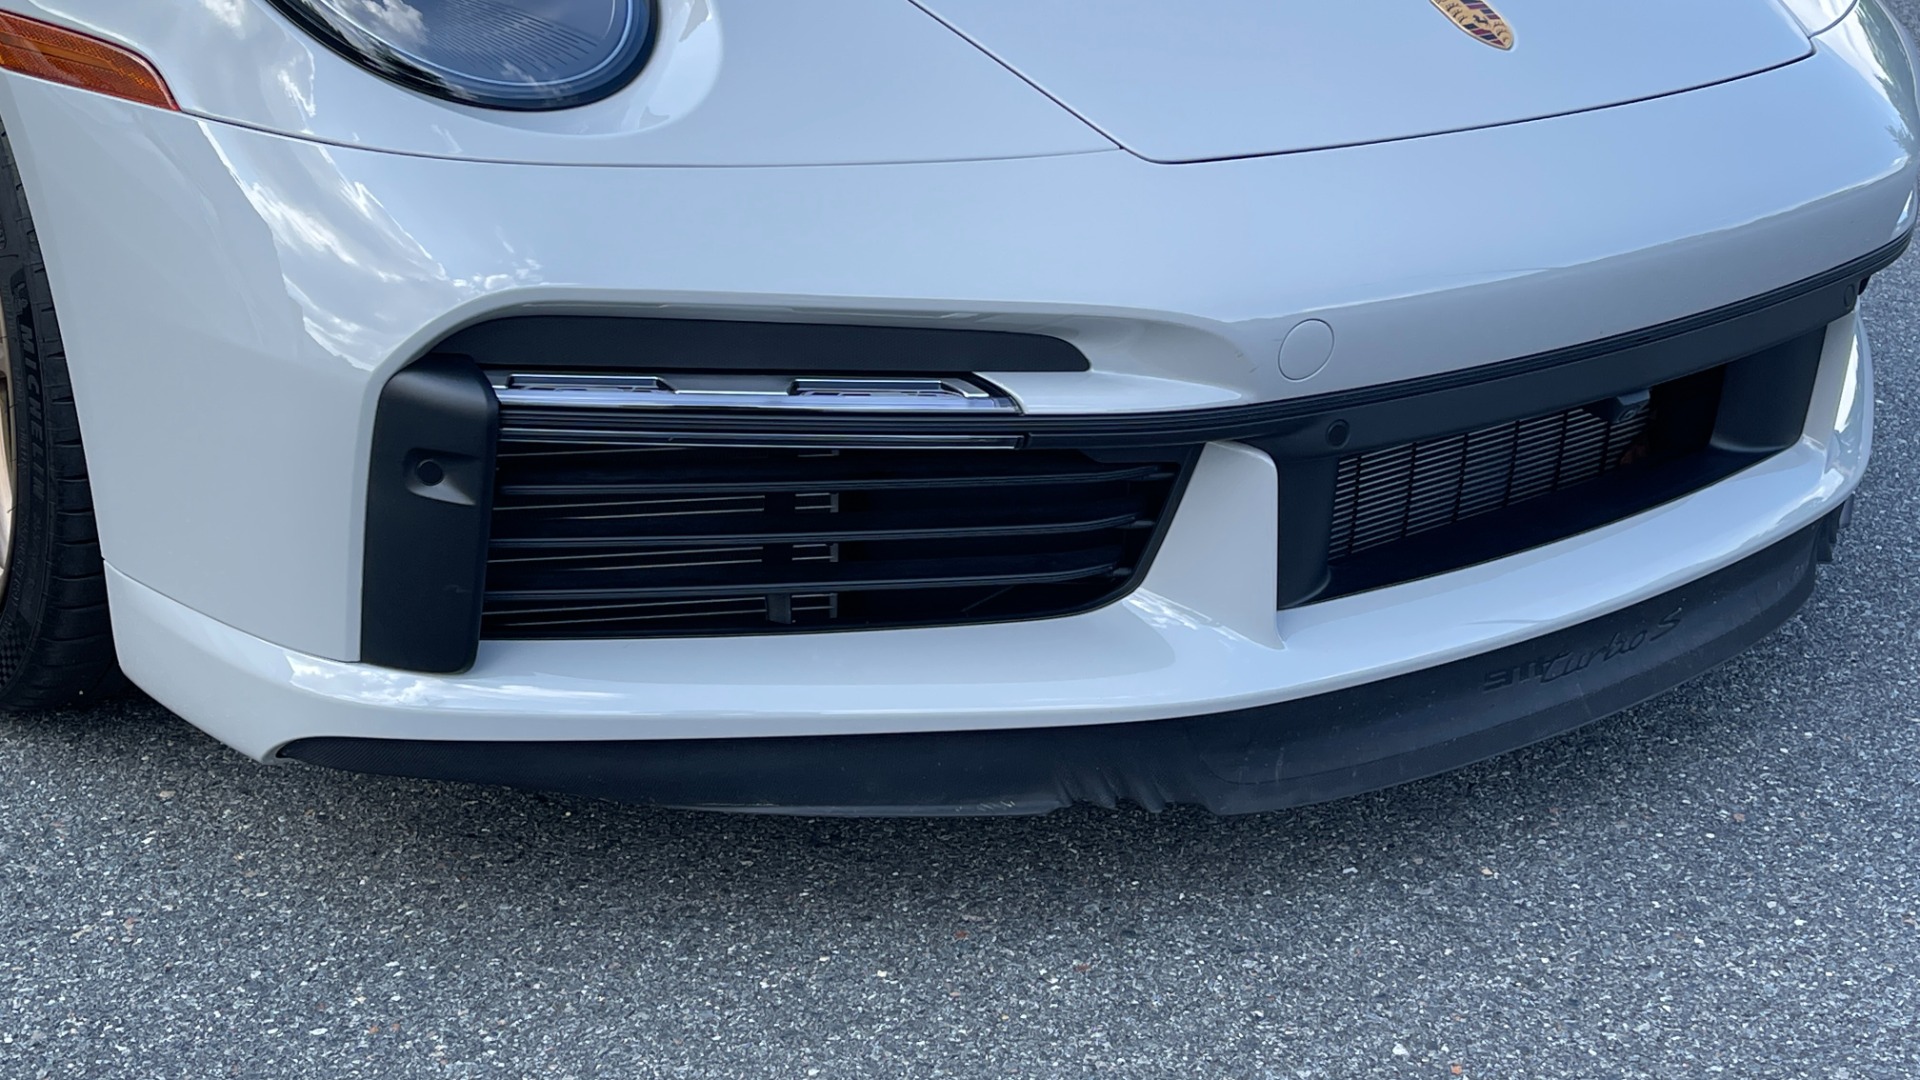 Used 2021 Porsche 911 Turbo S / HRE WHEELS / FRONT LIFT / MATRIX LIGHTS / PASM SUSPENSION for sale Sold at Formula Imports in Charlotte NC 28227 13